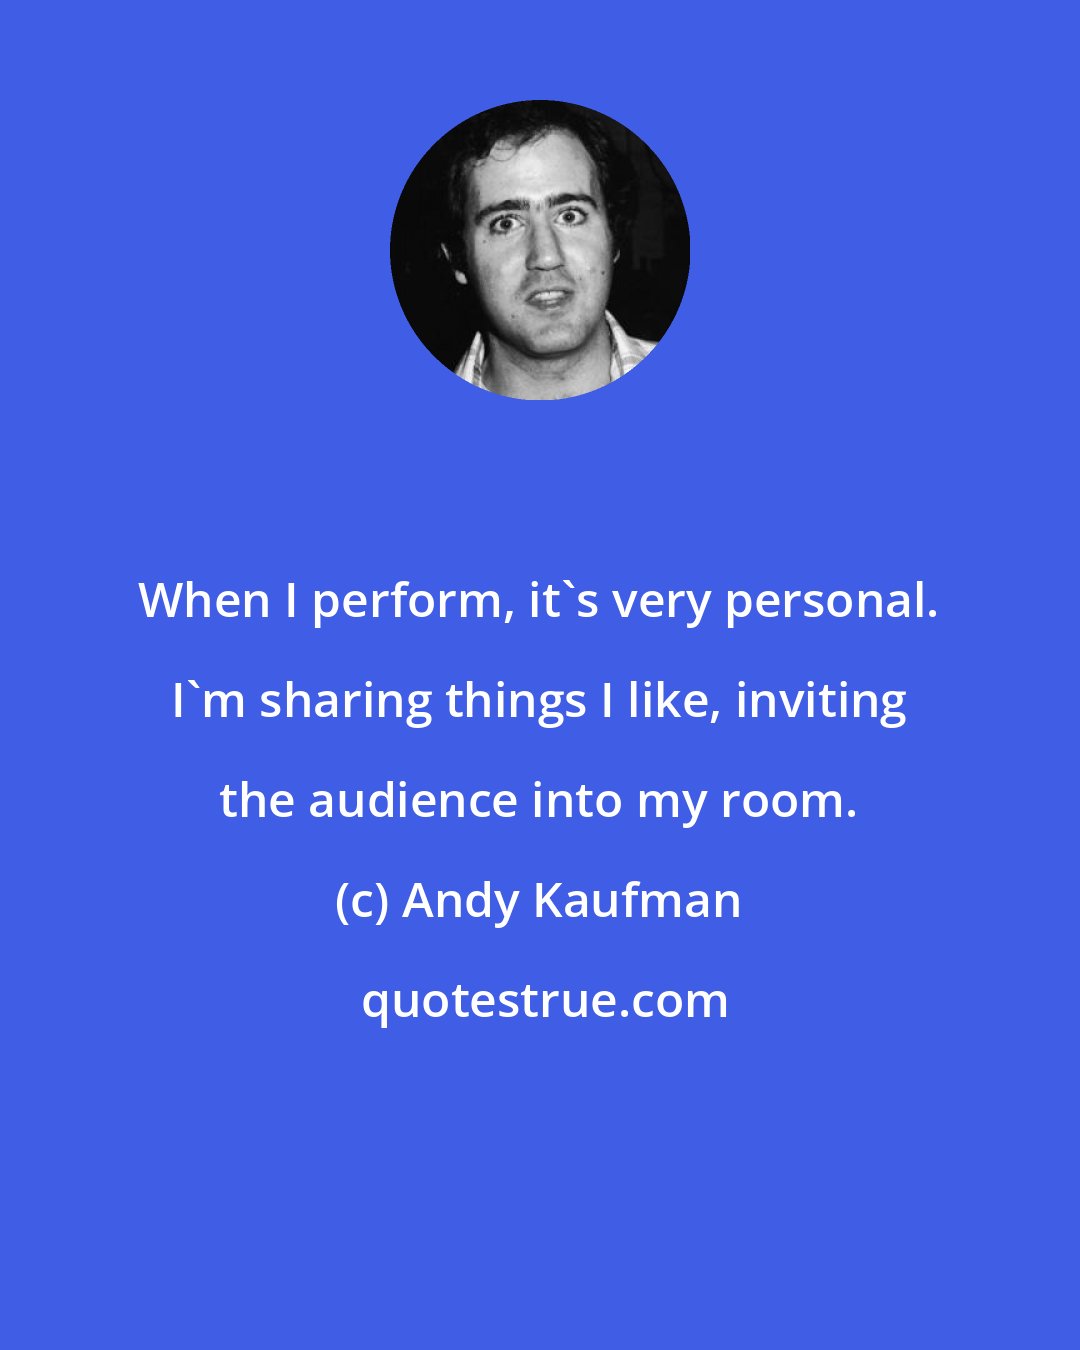 Andy Kaufman: When I perform, it's very personal. I'm sharing things I like, inviting the audience into my room.